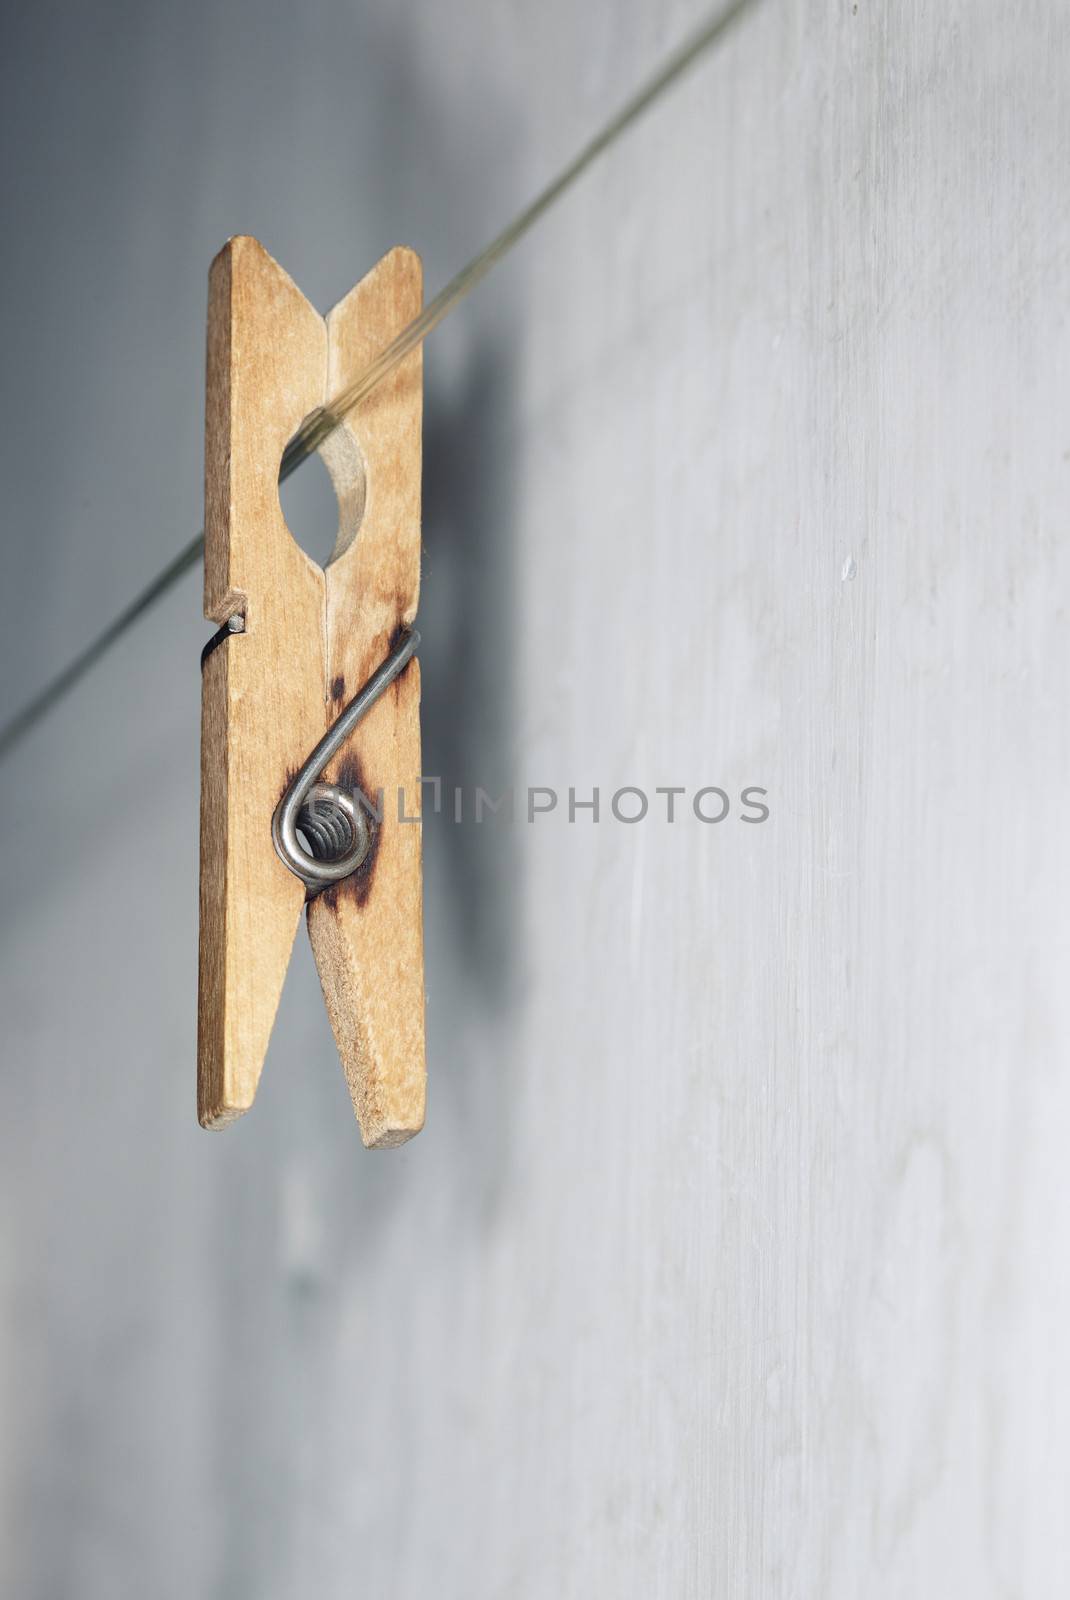 Close-up vertical photo of the old wooden clothes pin hanged on a clothes-line